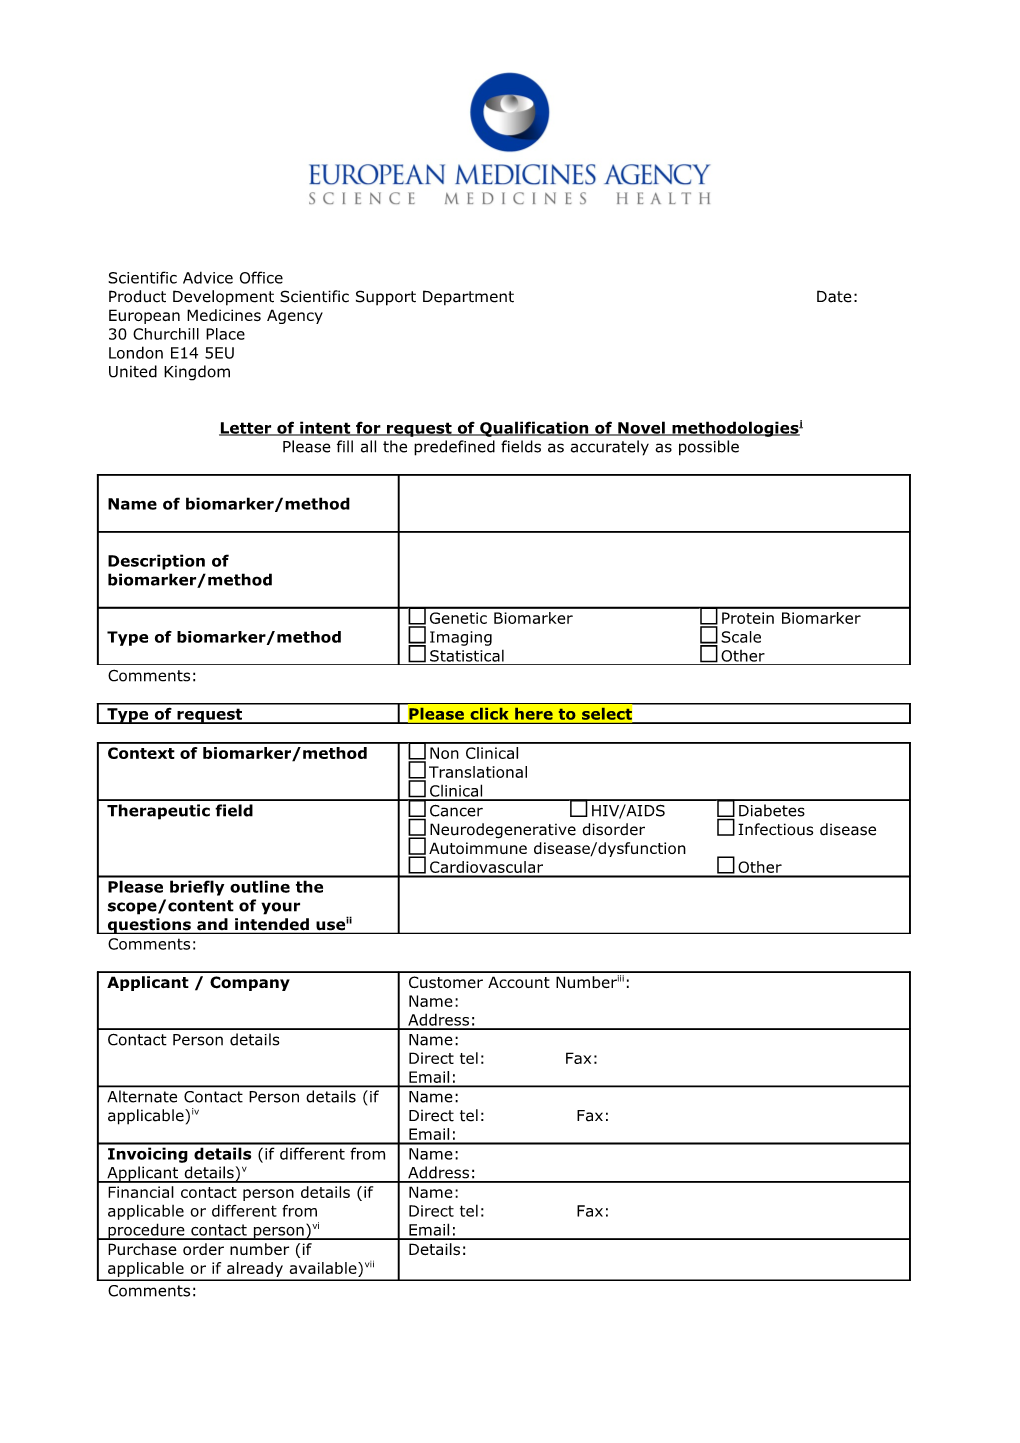 Template - Letter of Intent for Request of Qualification of Novel Methodologies to The